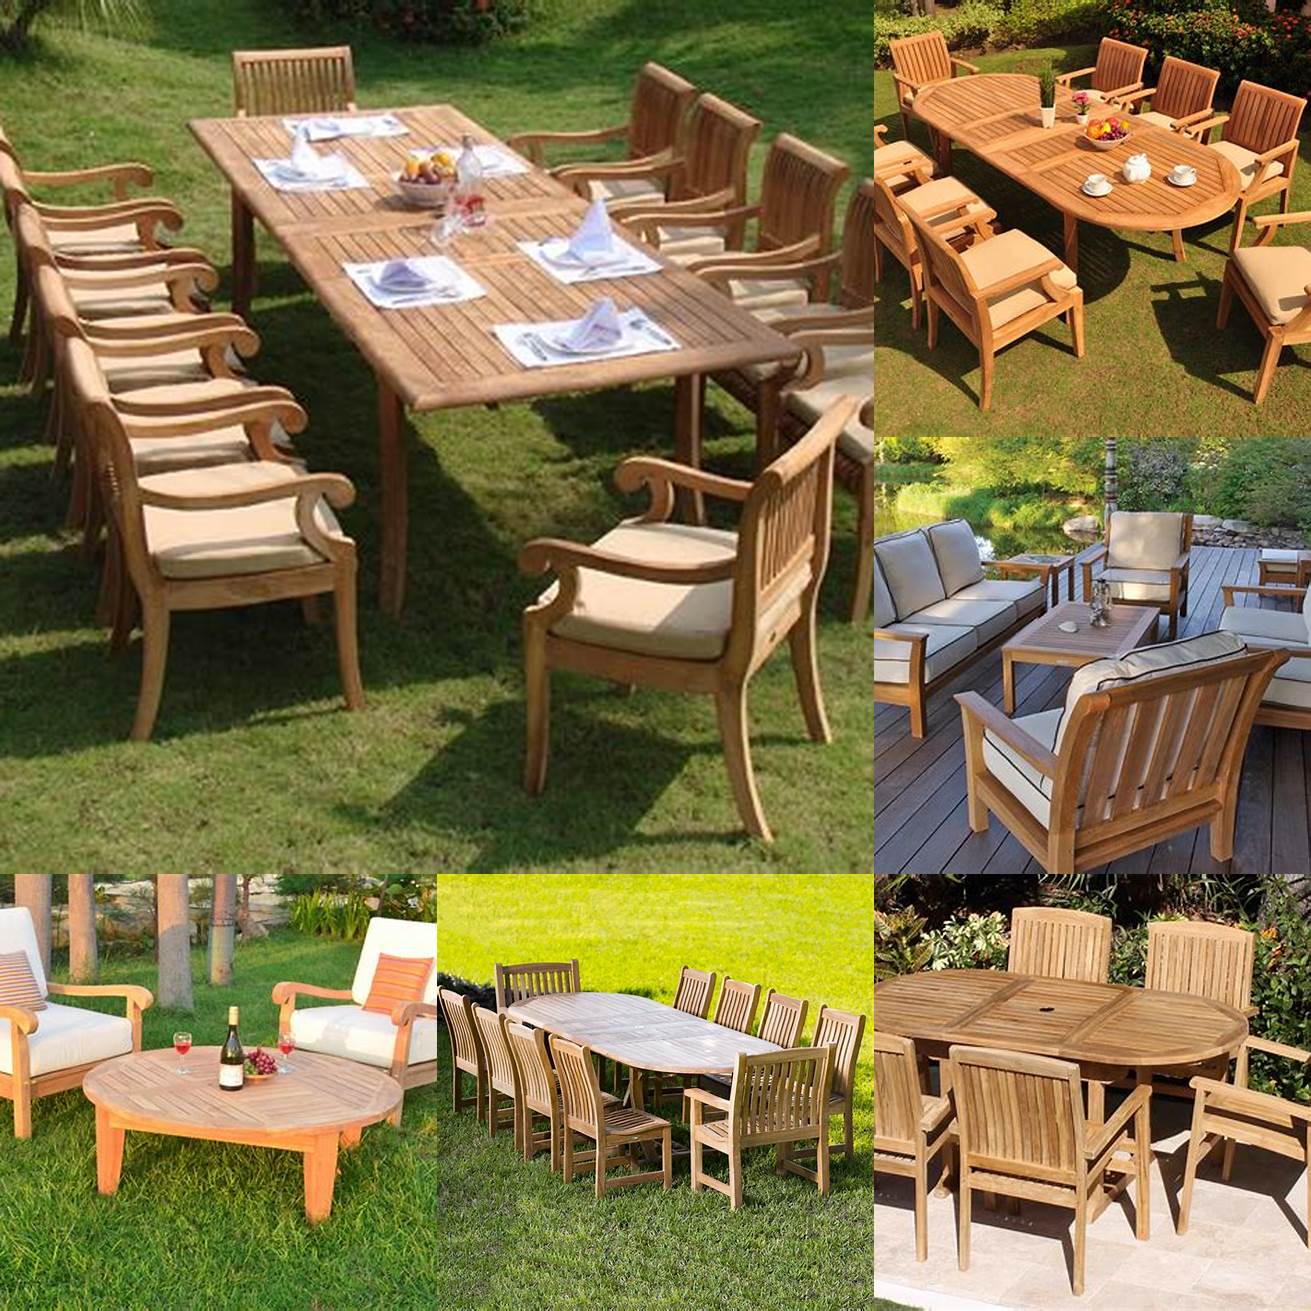 Photo of the teak furniture with an outdoor setting